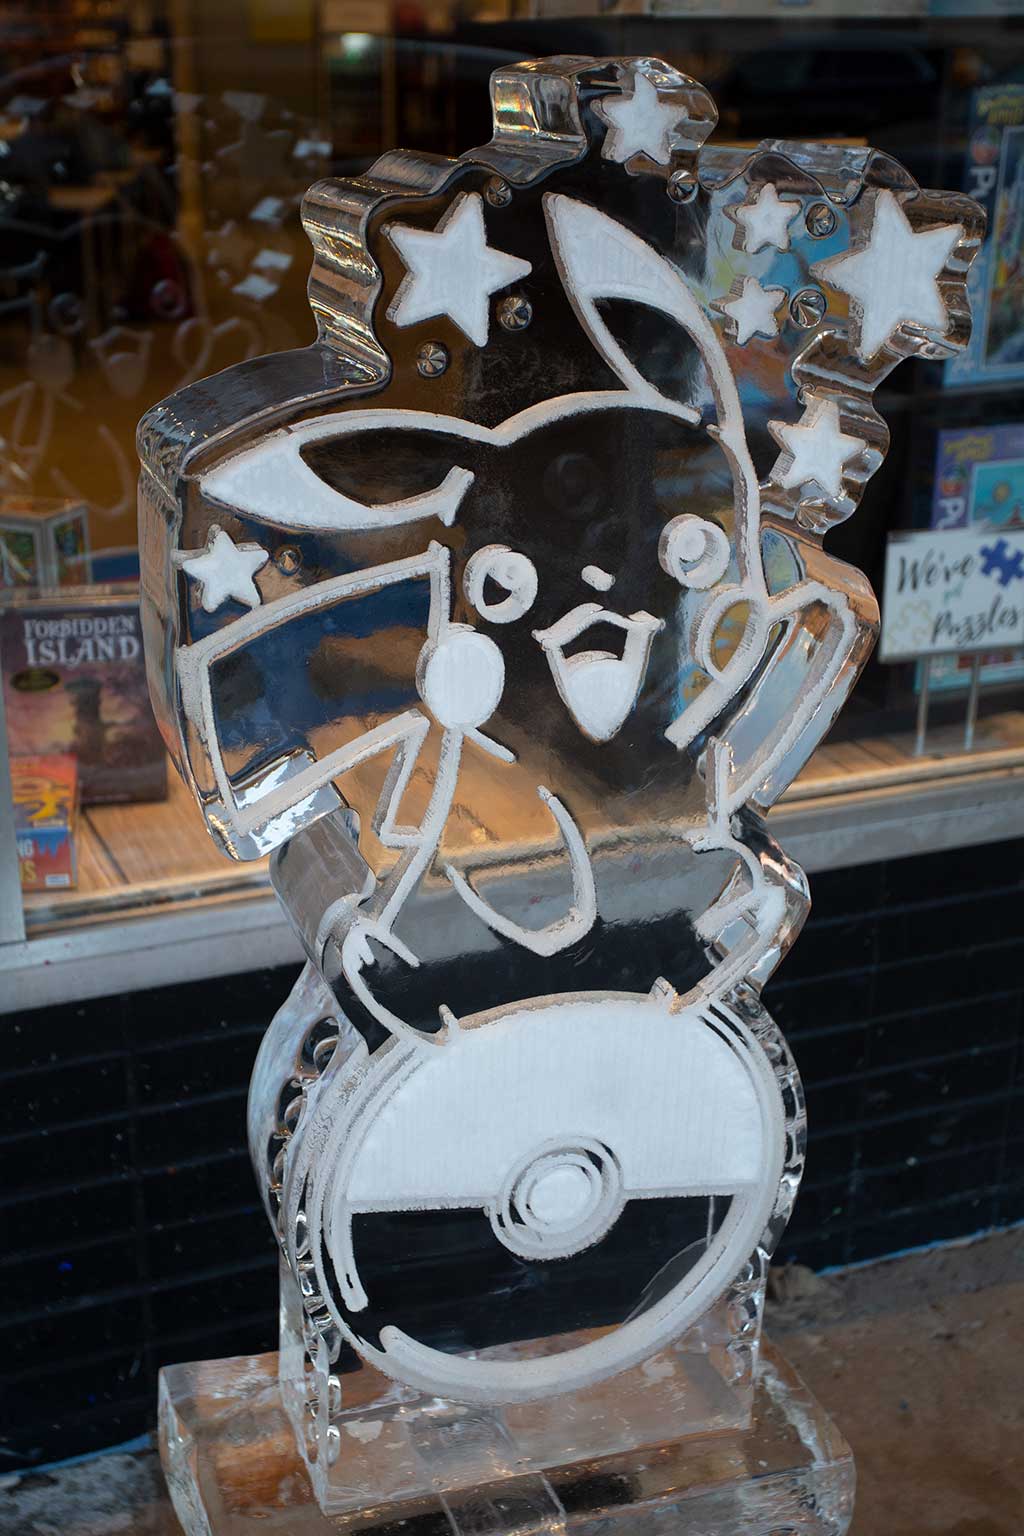 drive-swim-fly-downers-grove-chicago-illinois-ice-sculpture-downtown-businesses-pikachu